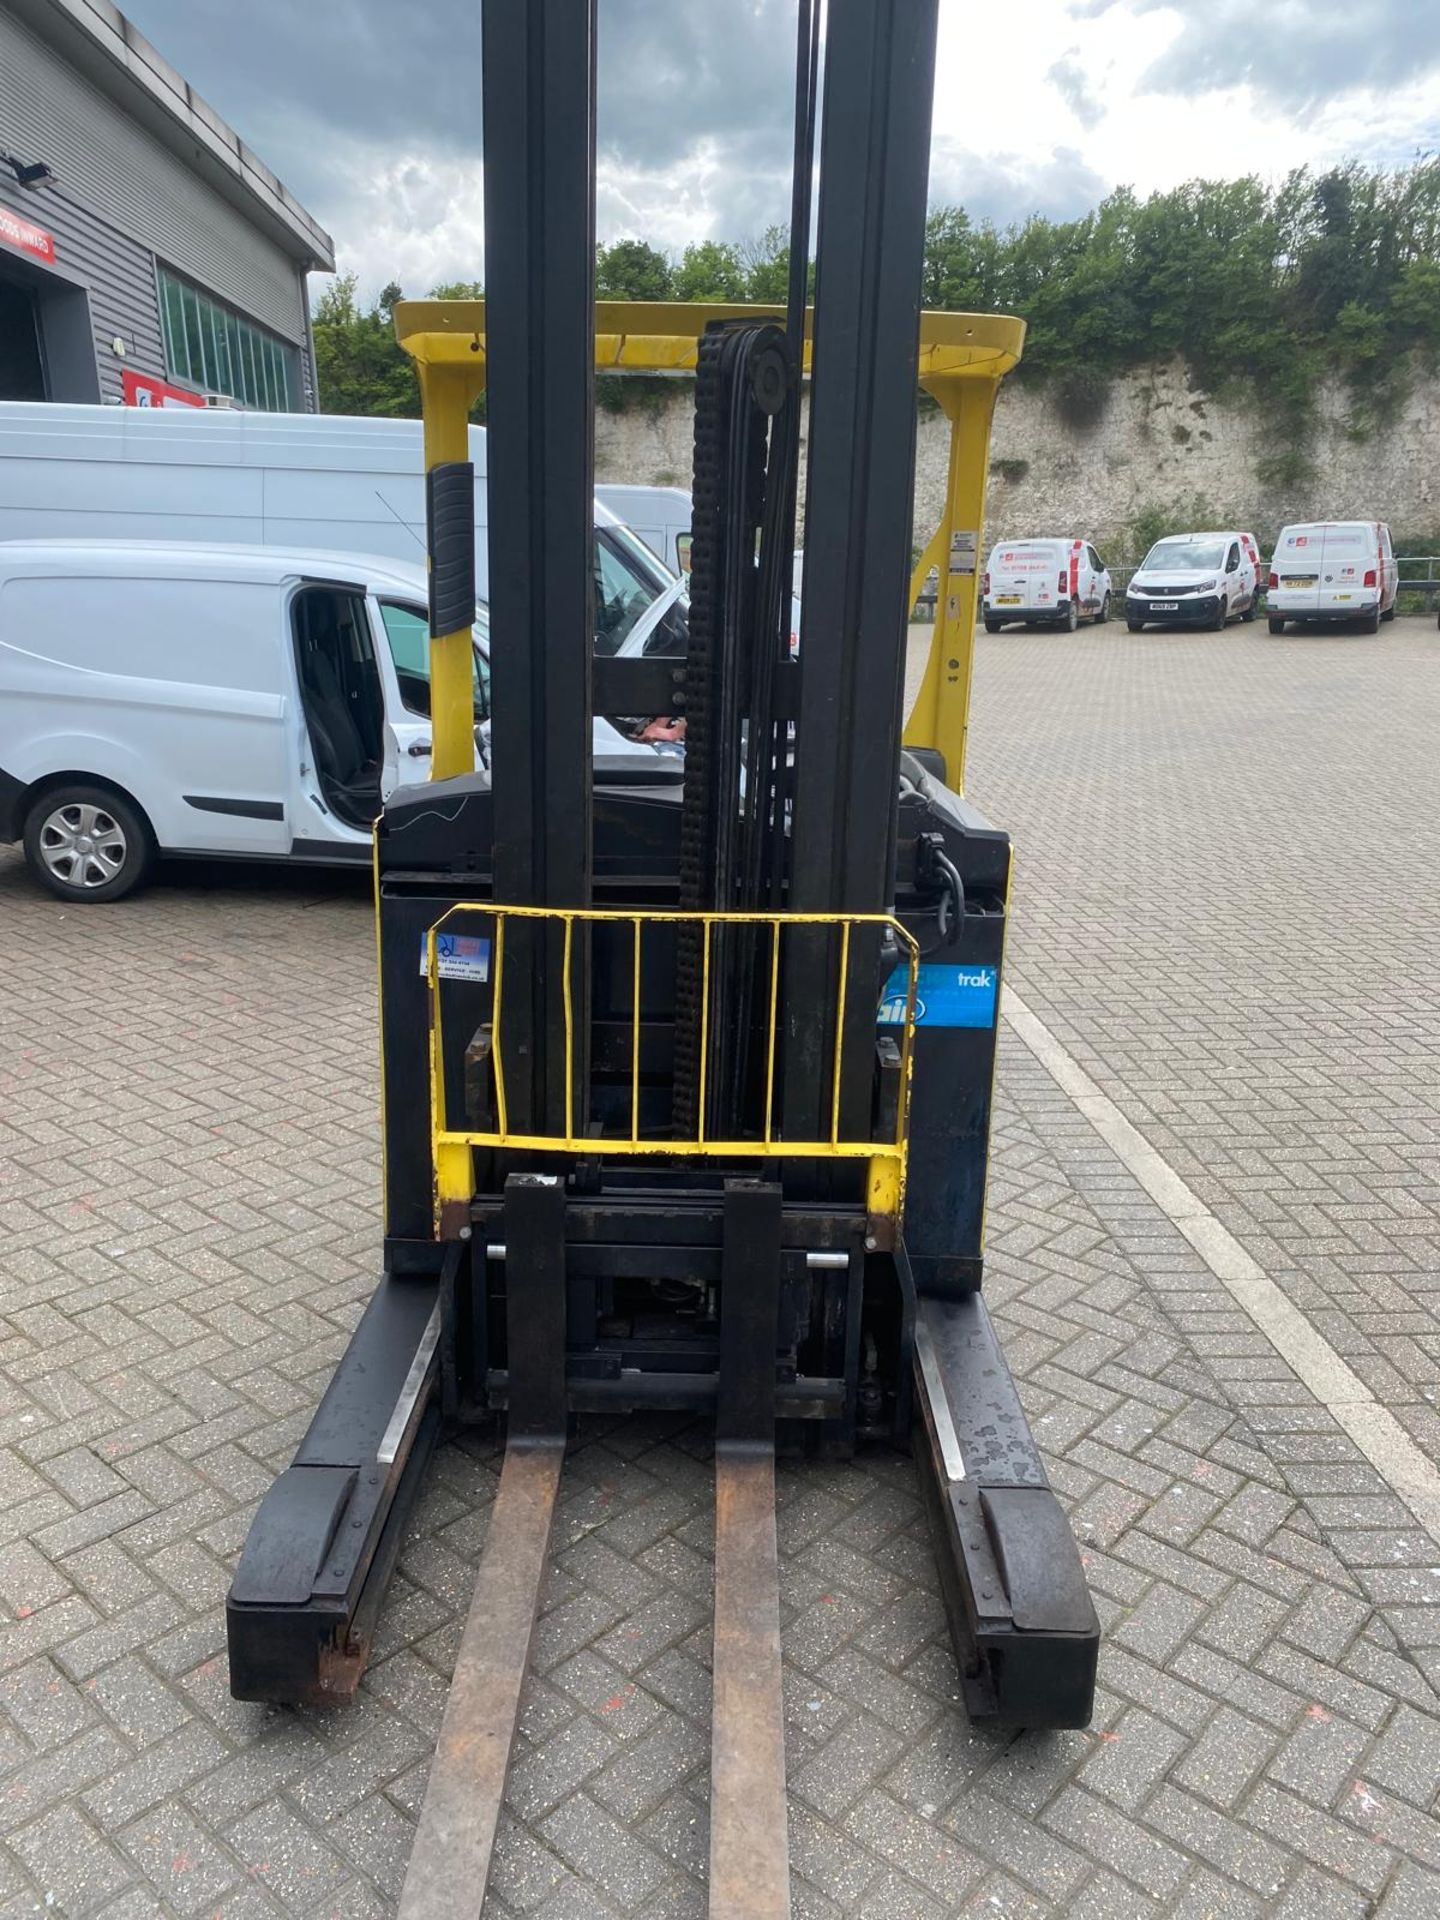 Hyster Forklift Reach Truck - Year: 2007 - 1,400kg Capacity - 8.5m Lift Height - Includes Charger - Image 4 of 10